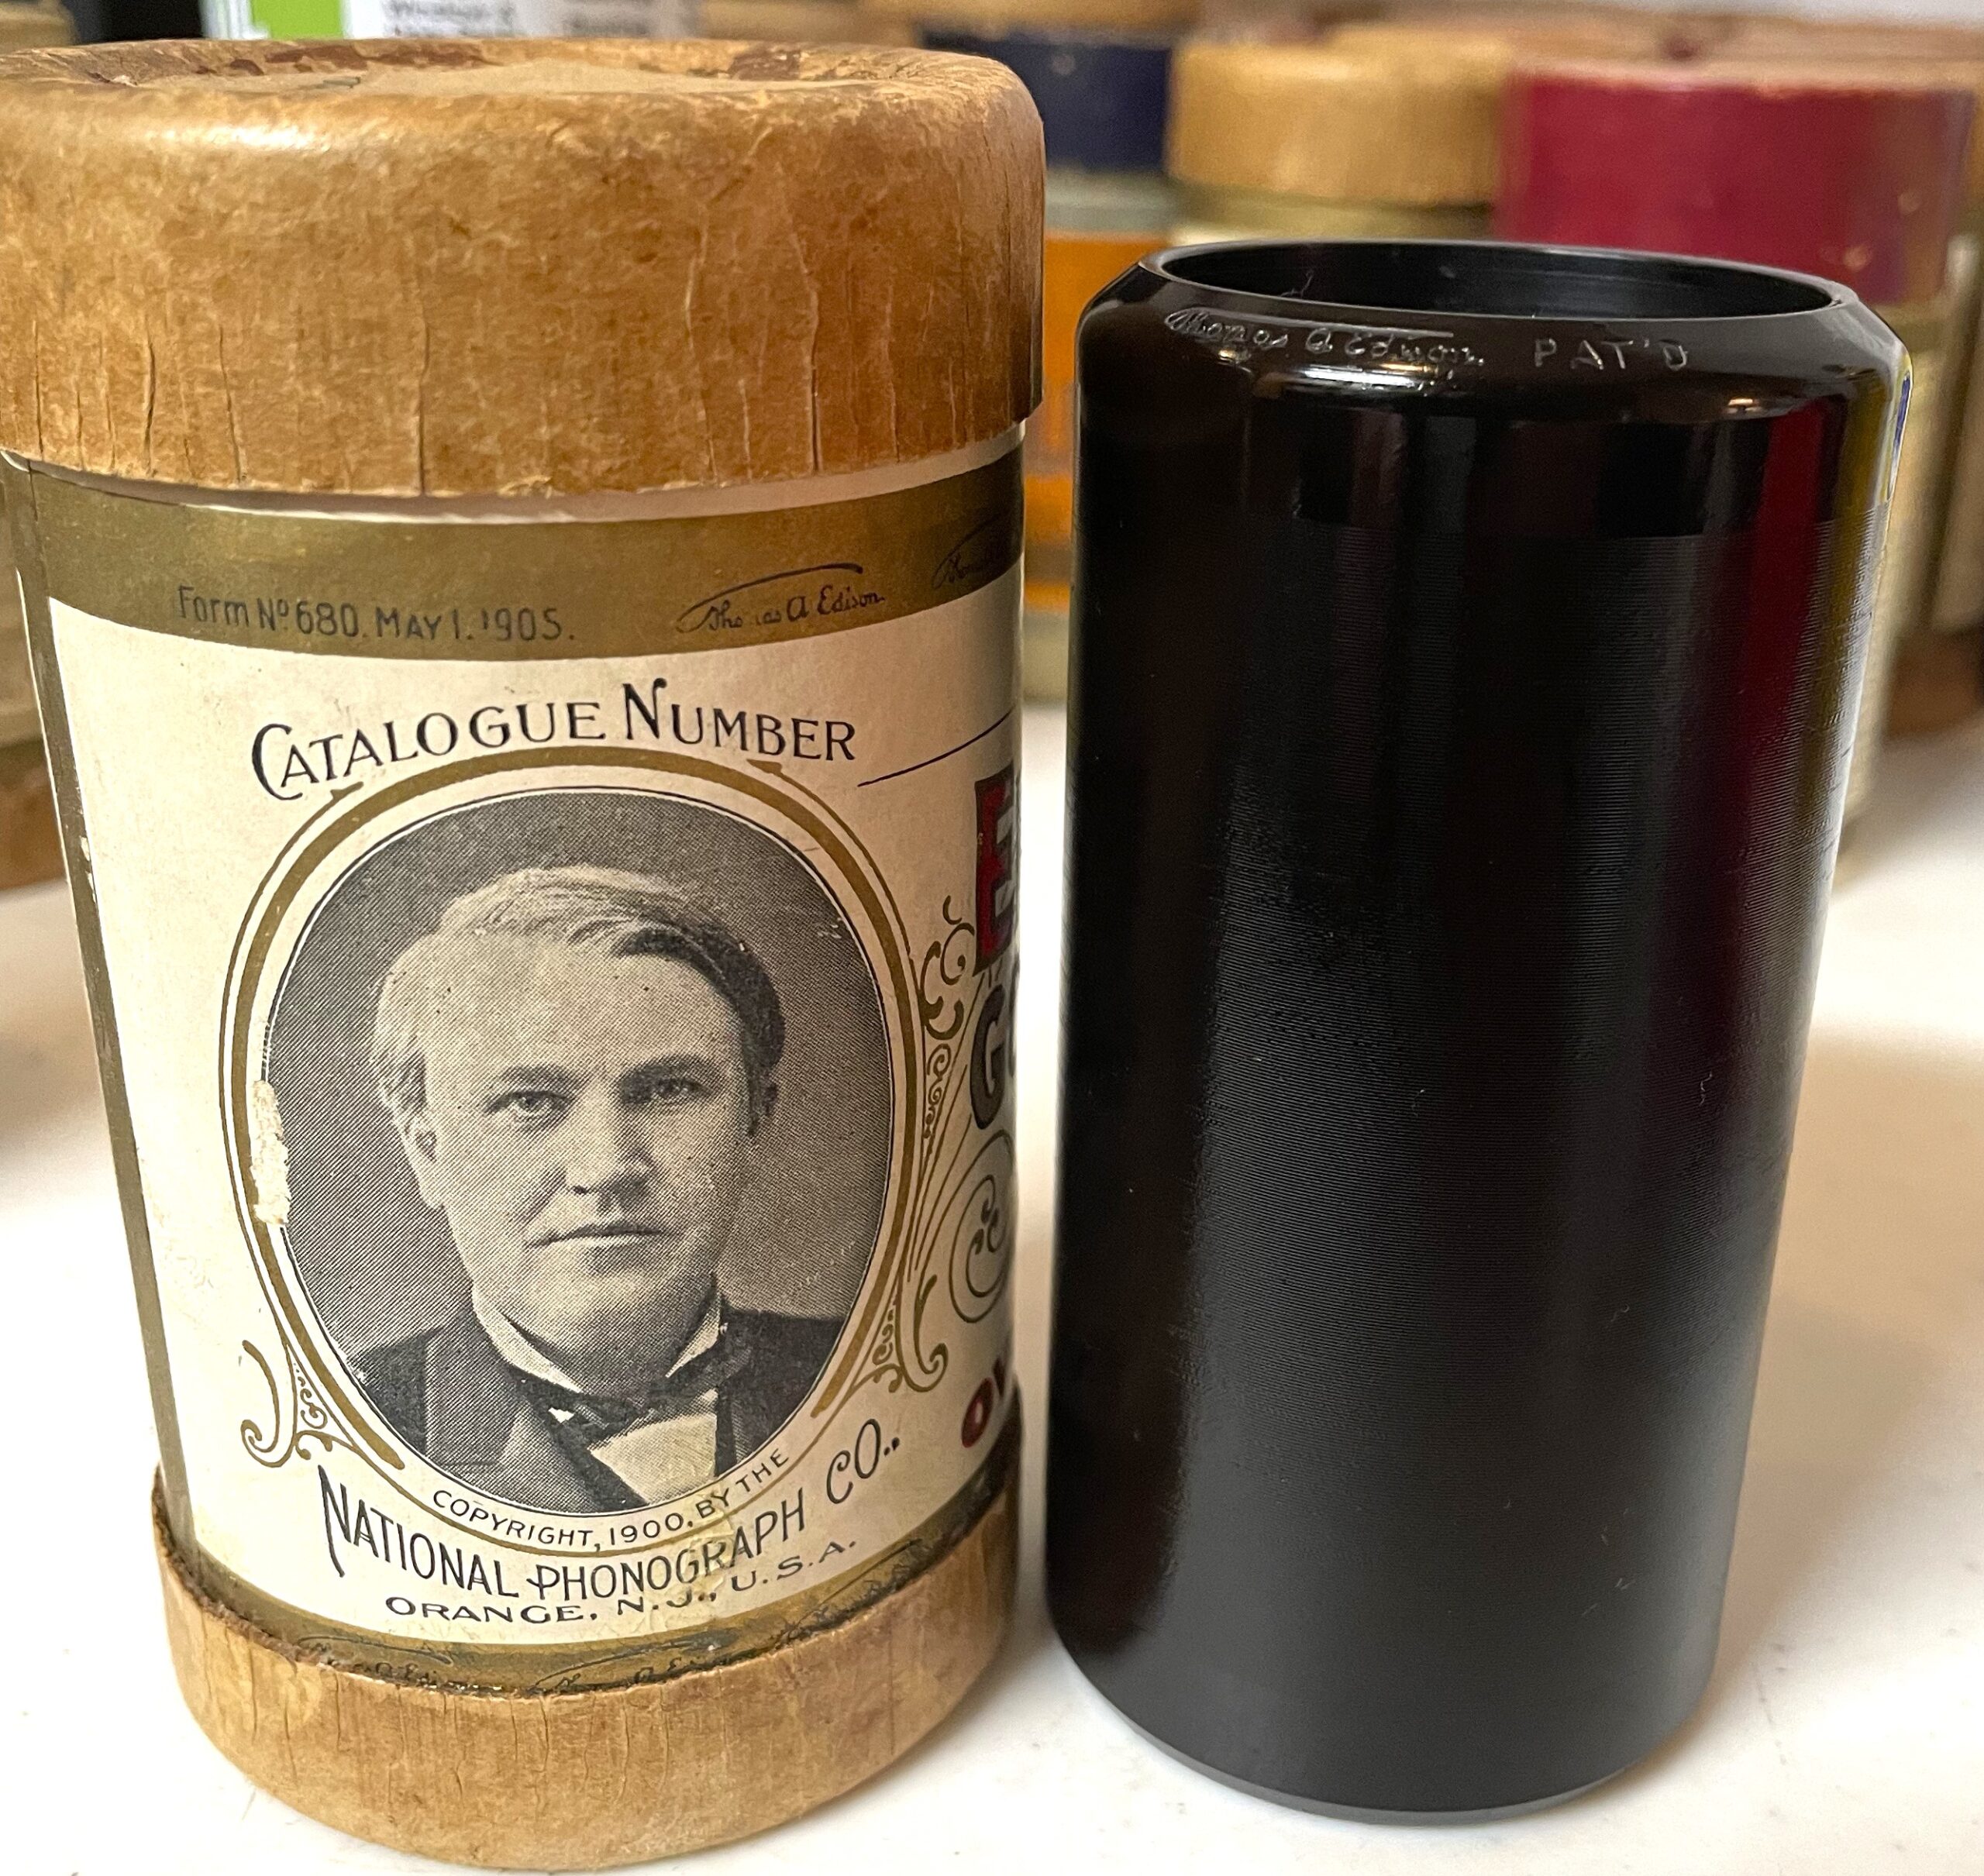 Edison 2 Minute Cylinder…” Making the Fiddle Talk”